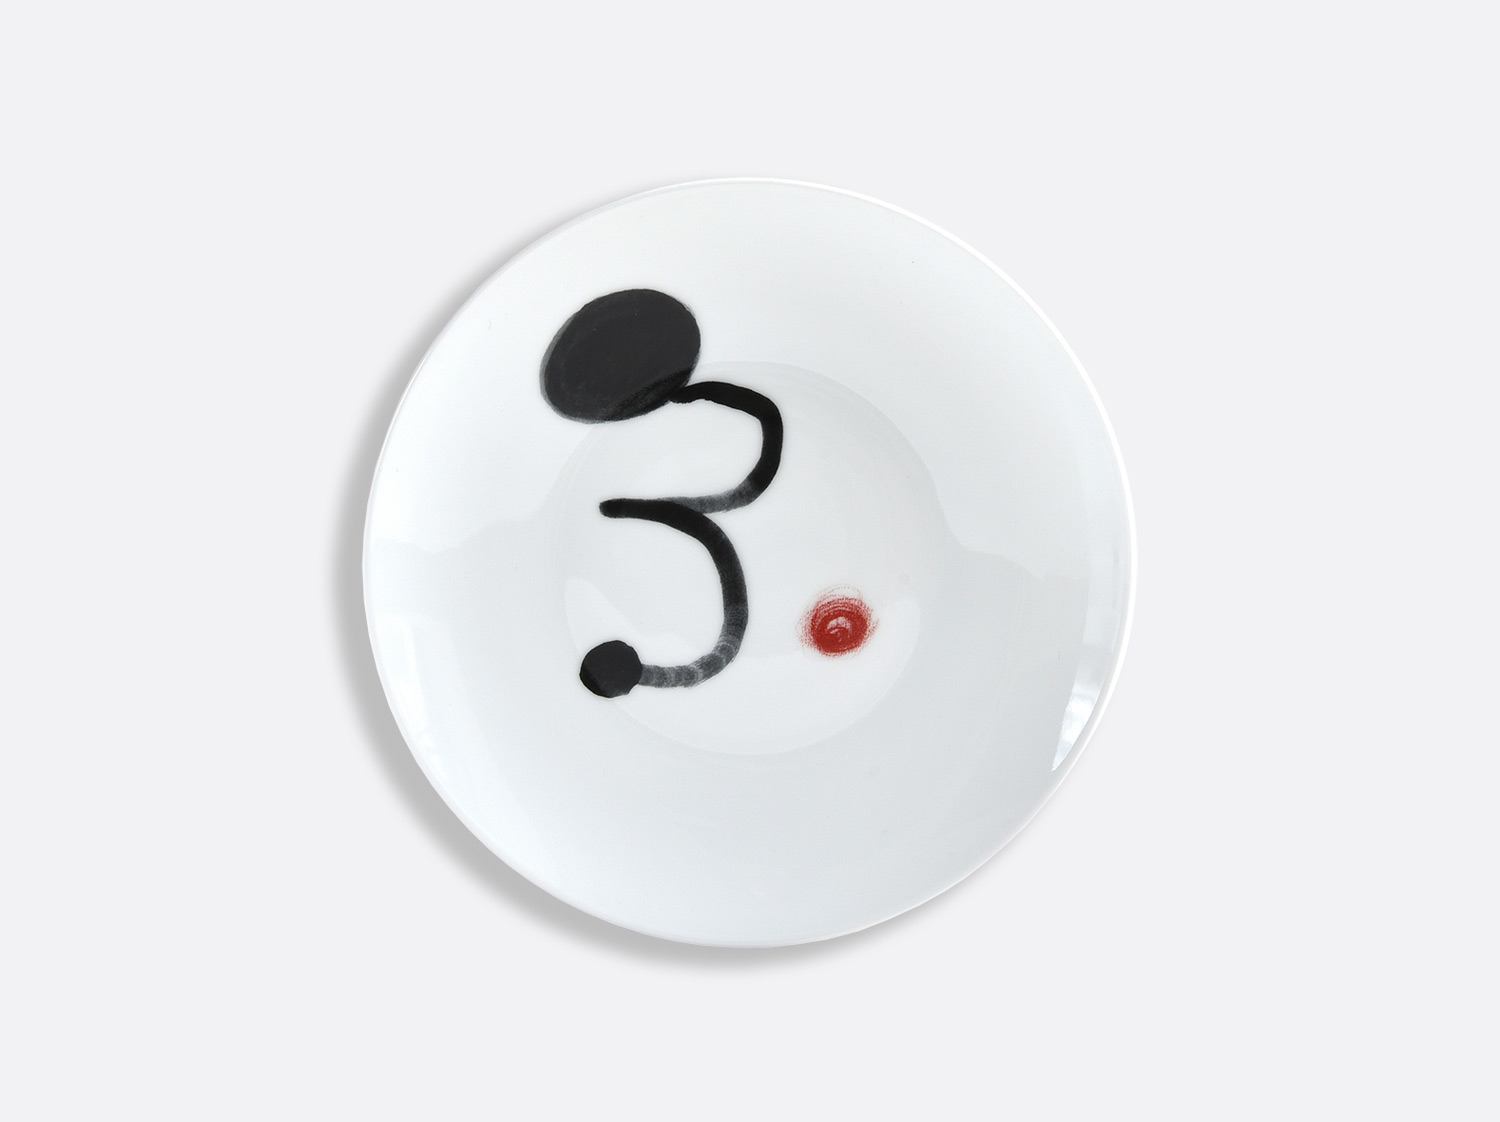 China 2 Bread and butter plates 16 cm Rouge - Page 52 of the collection PARLER SEUL - Joan Miro | Bernardaud